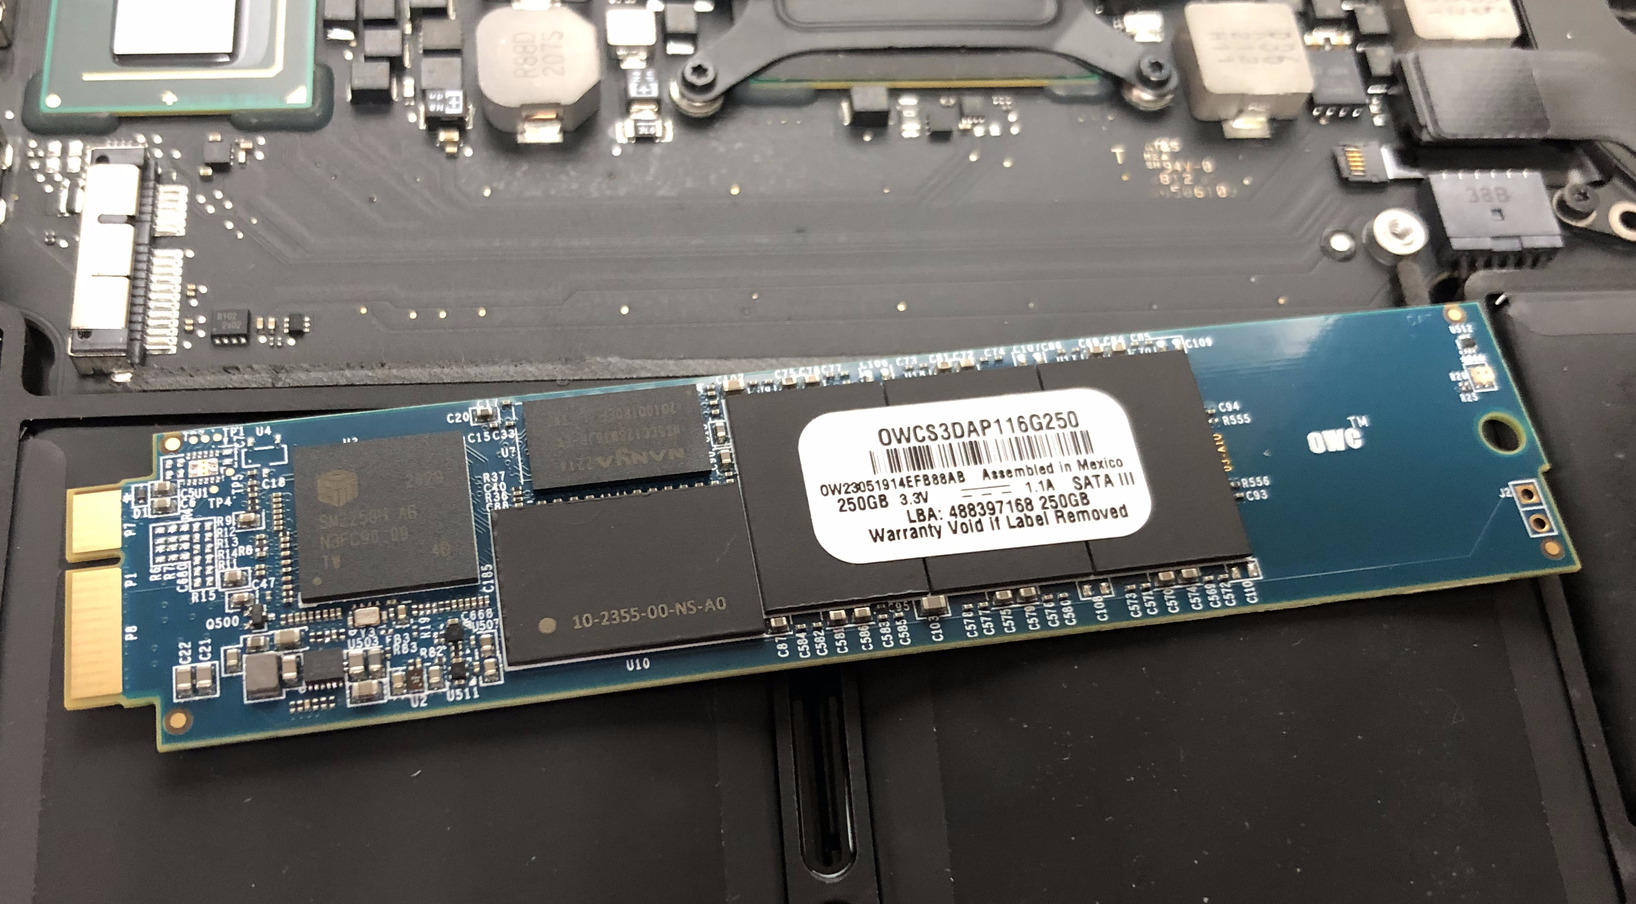 Figure 6a. View of the new SSD